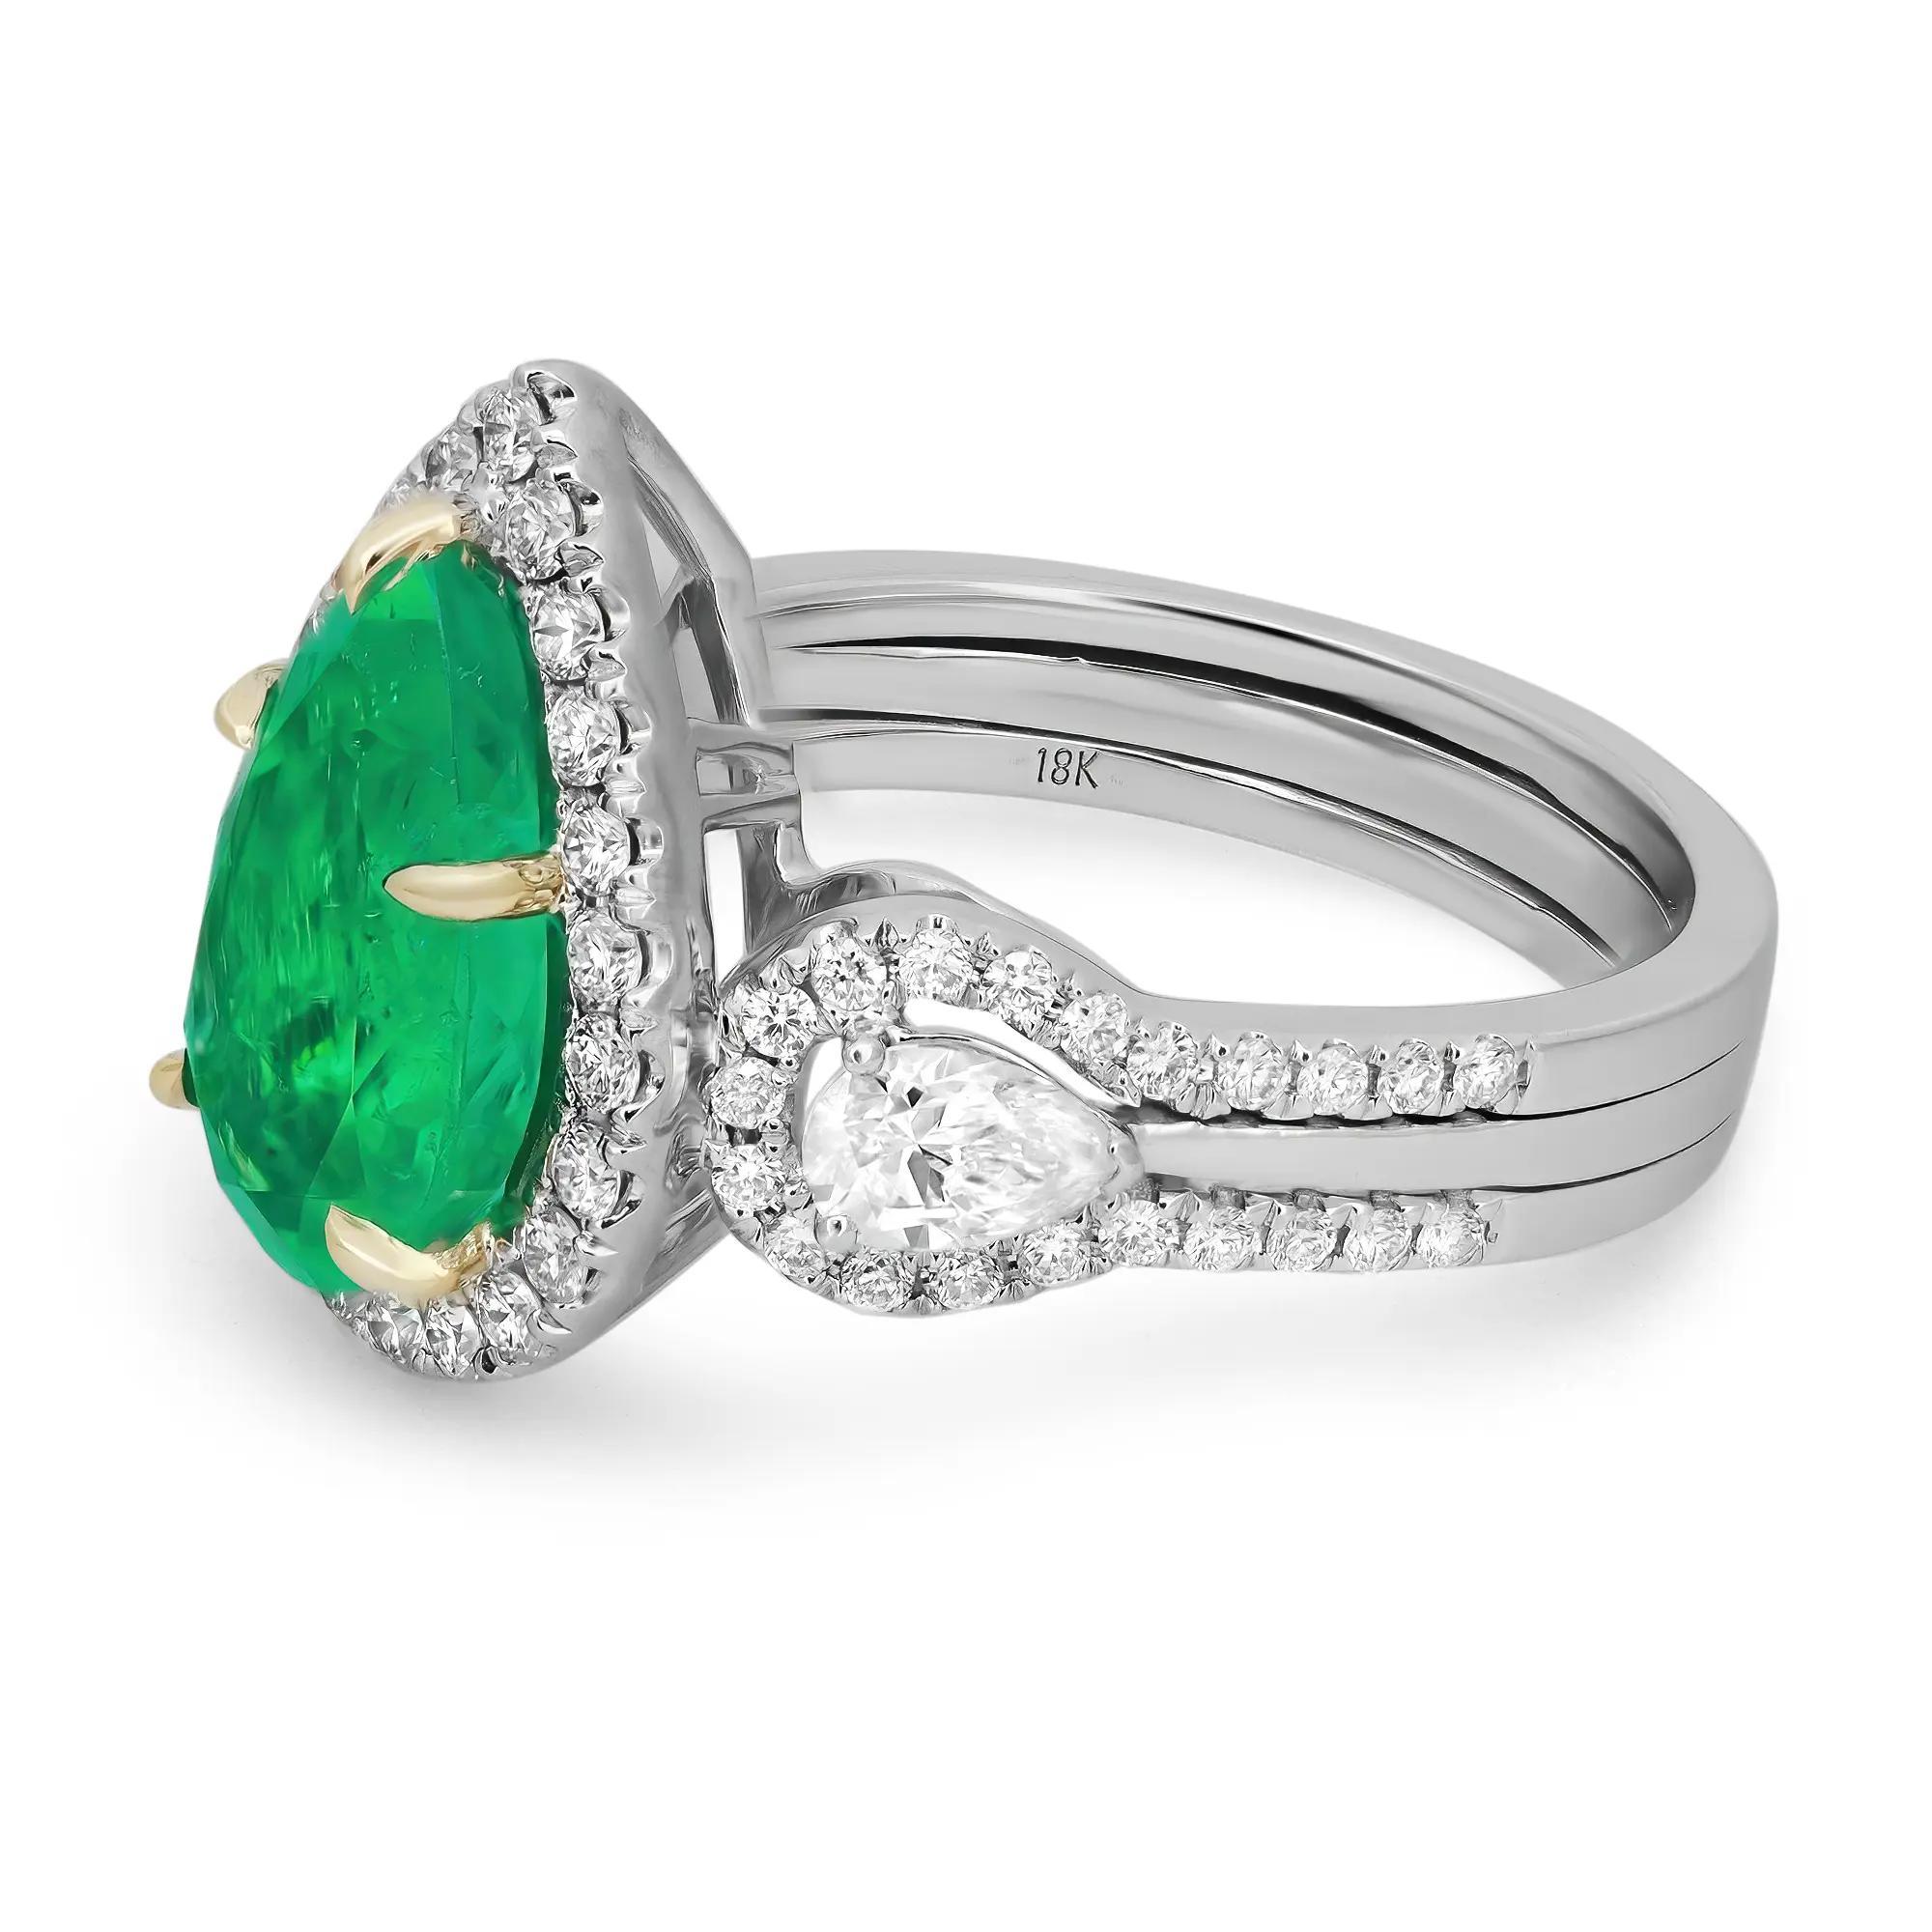 Wrap your finger with this extraordinary ring showcasing a GIA certified prong set pear cut rich green Colombian Emerald weighing 2.60 carats surrounded by a halo of round brilliant cut diamonds with two prong set pear cut diamonds on each side